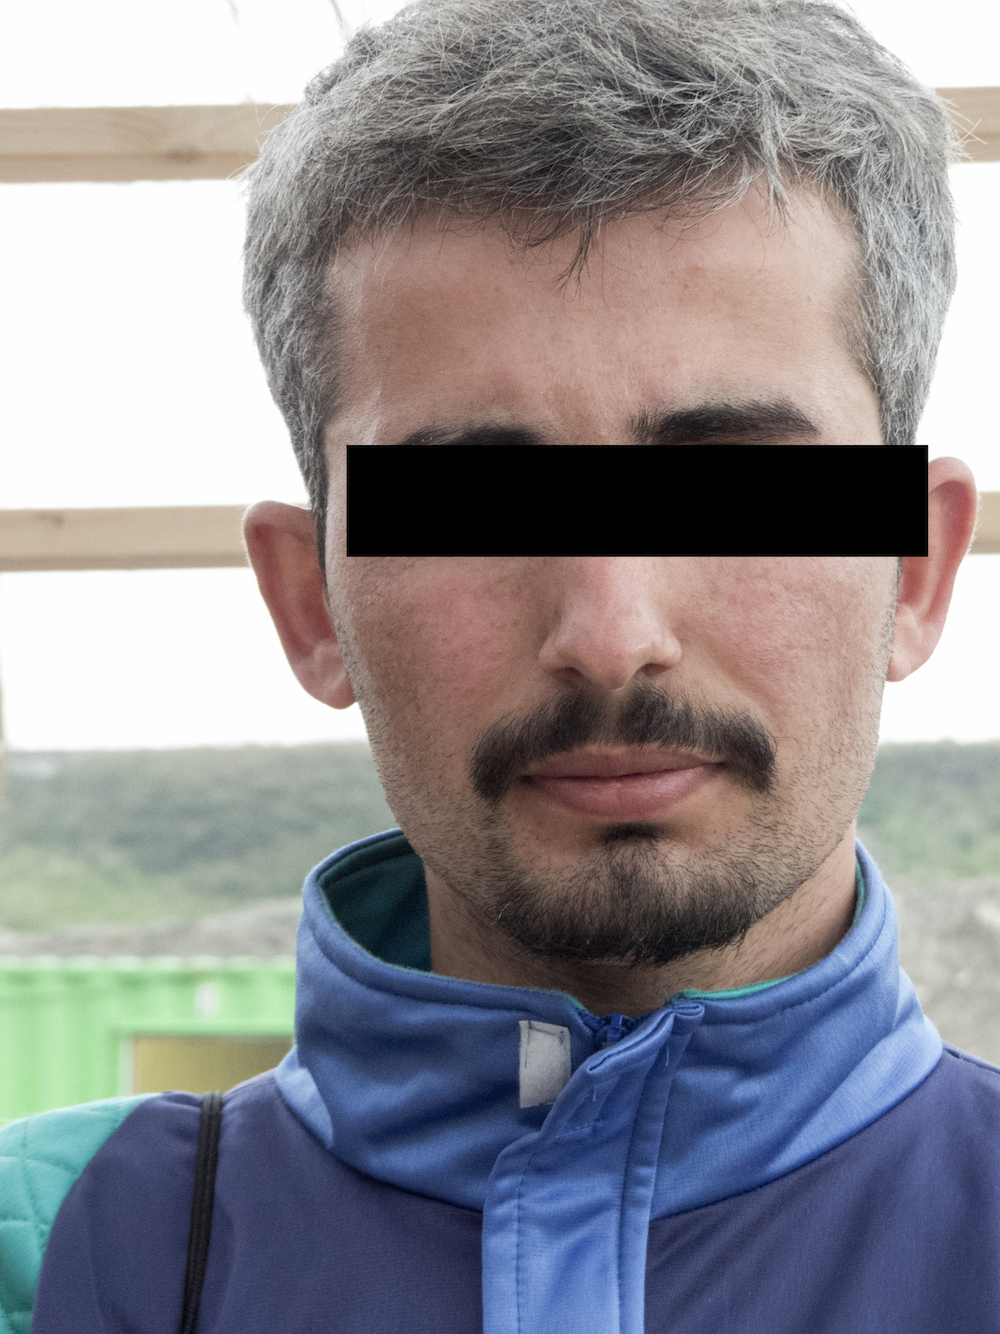 Image of a refugee with his eyes covered. Evidence of them in France hurts their asylum claim.